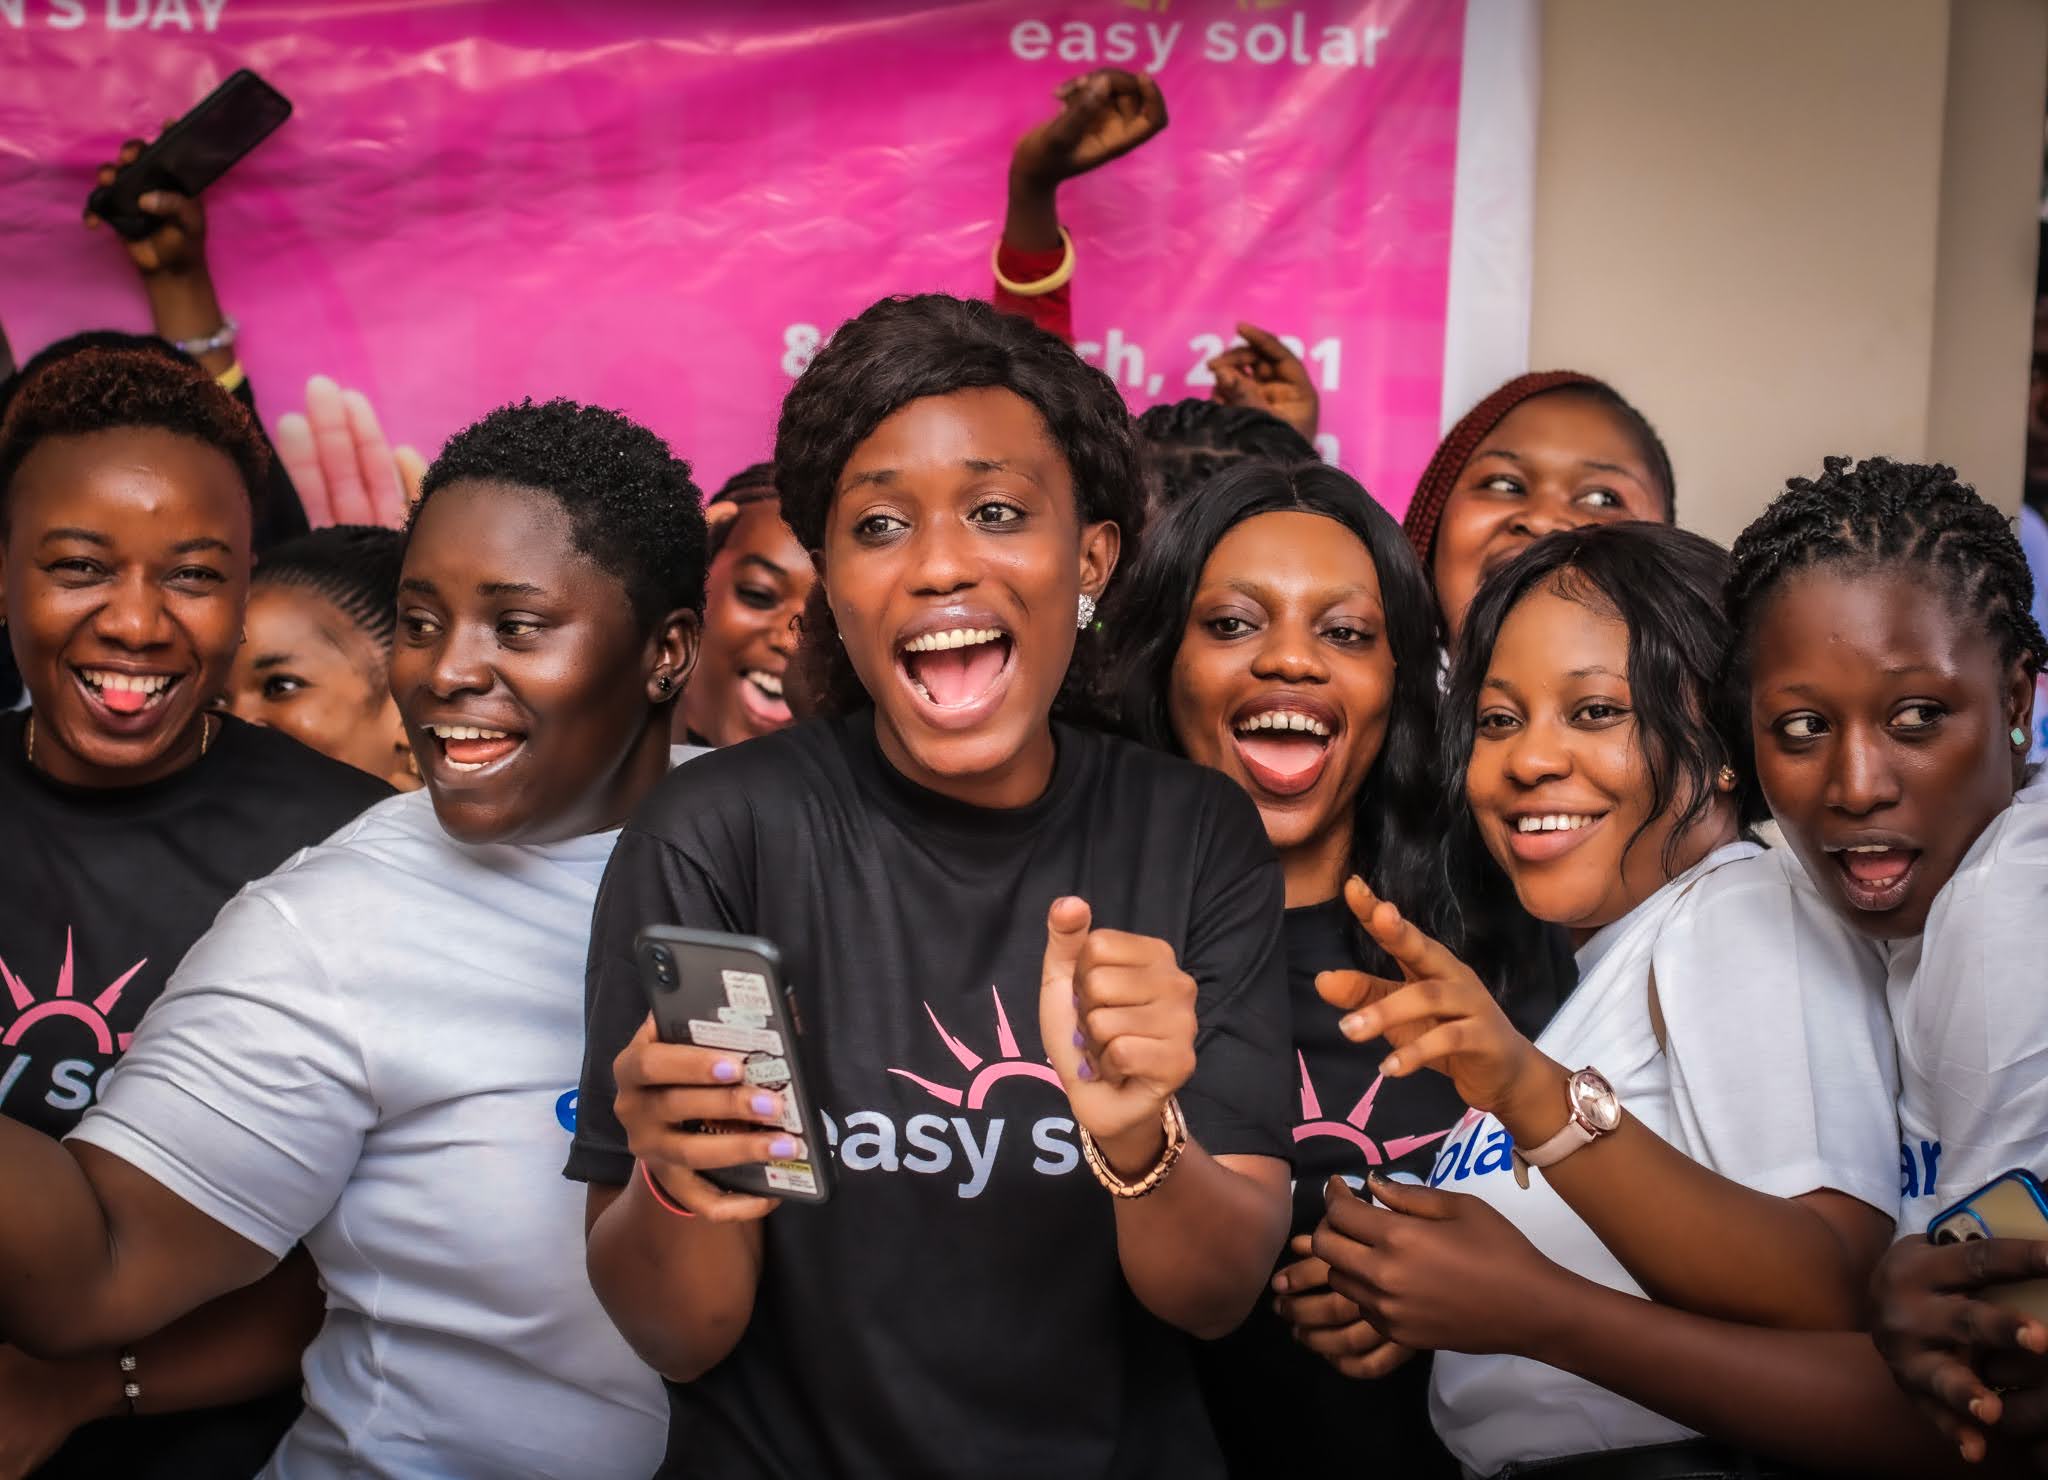 The SIMA Angaza Distributor Finance Fund invests in Easy Solar and supports its goal to tackle gender parity issues in the workplace.